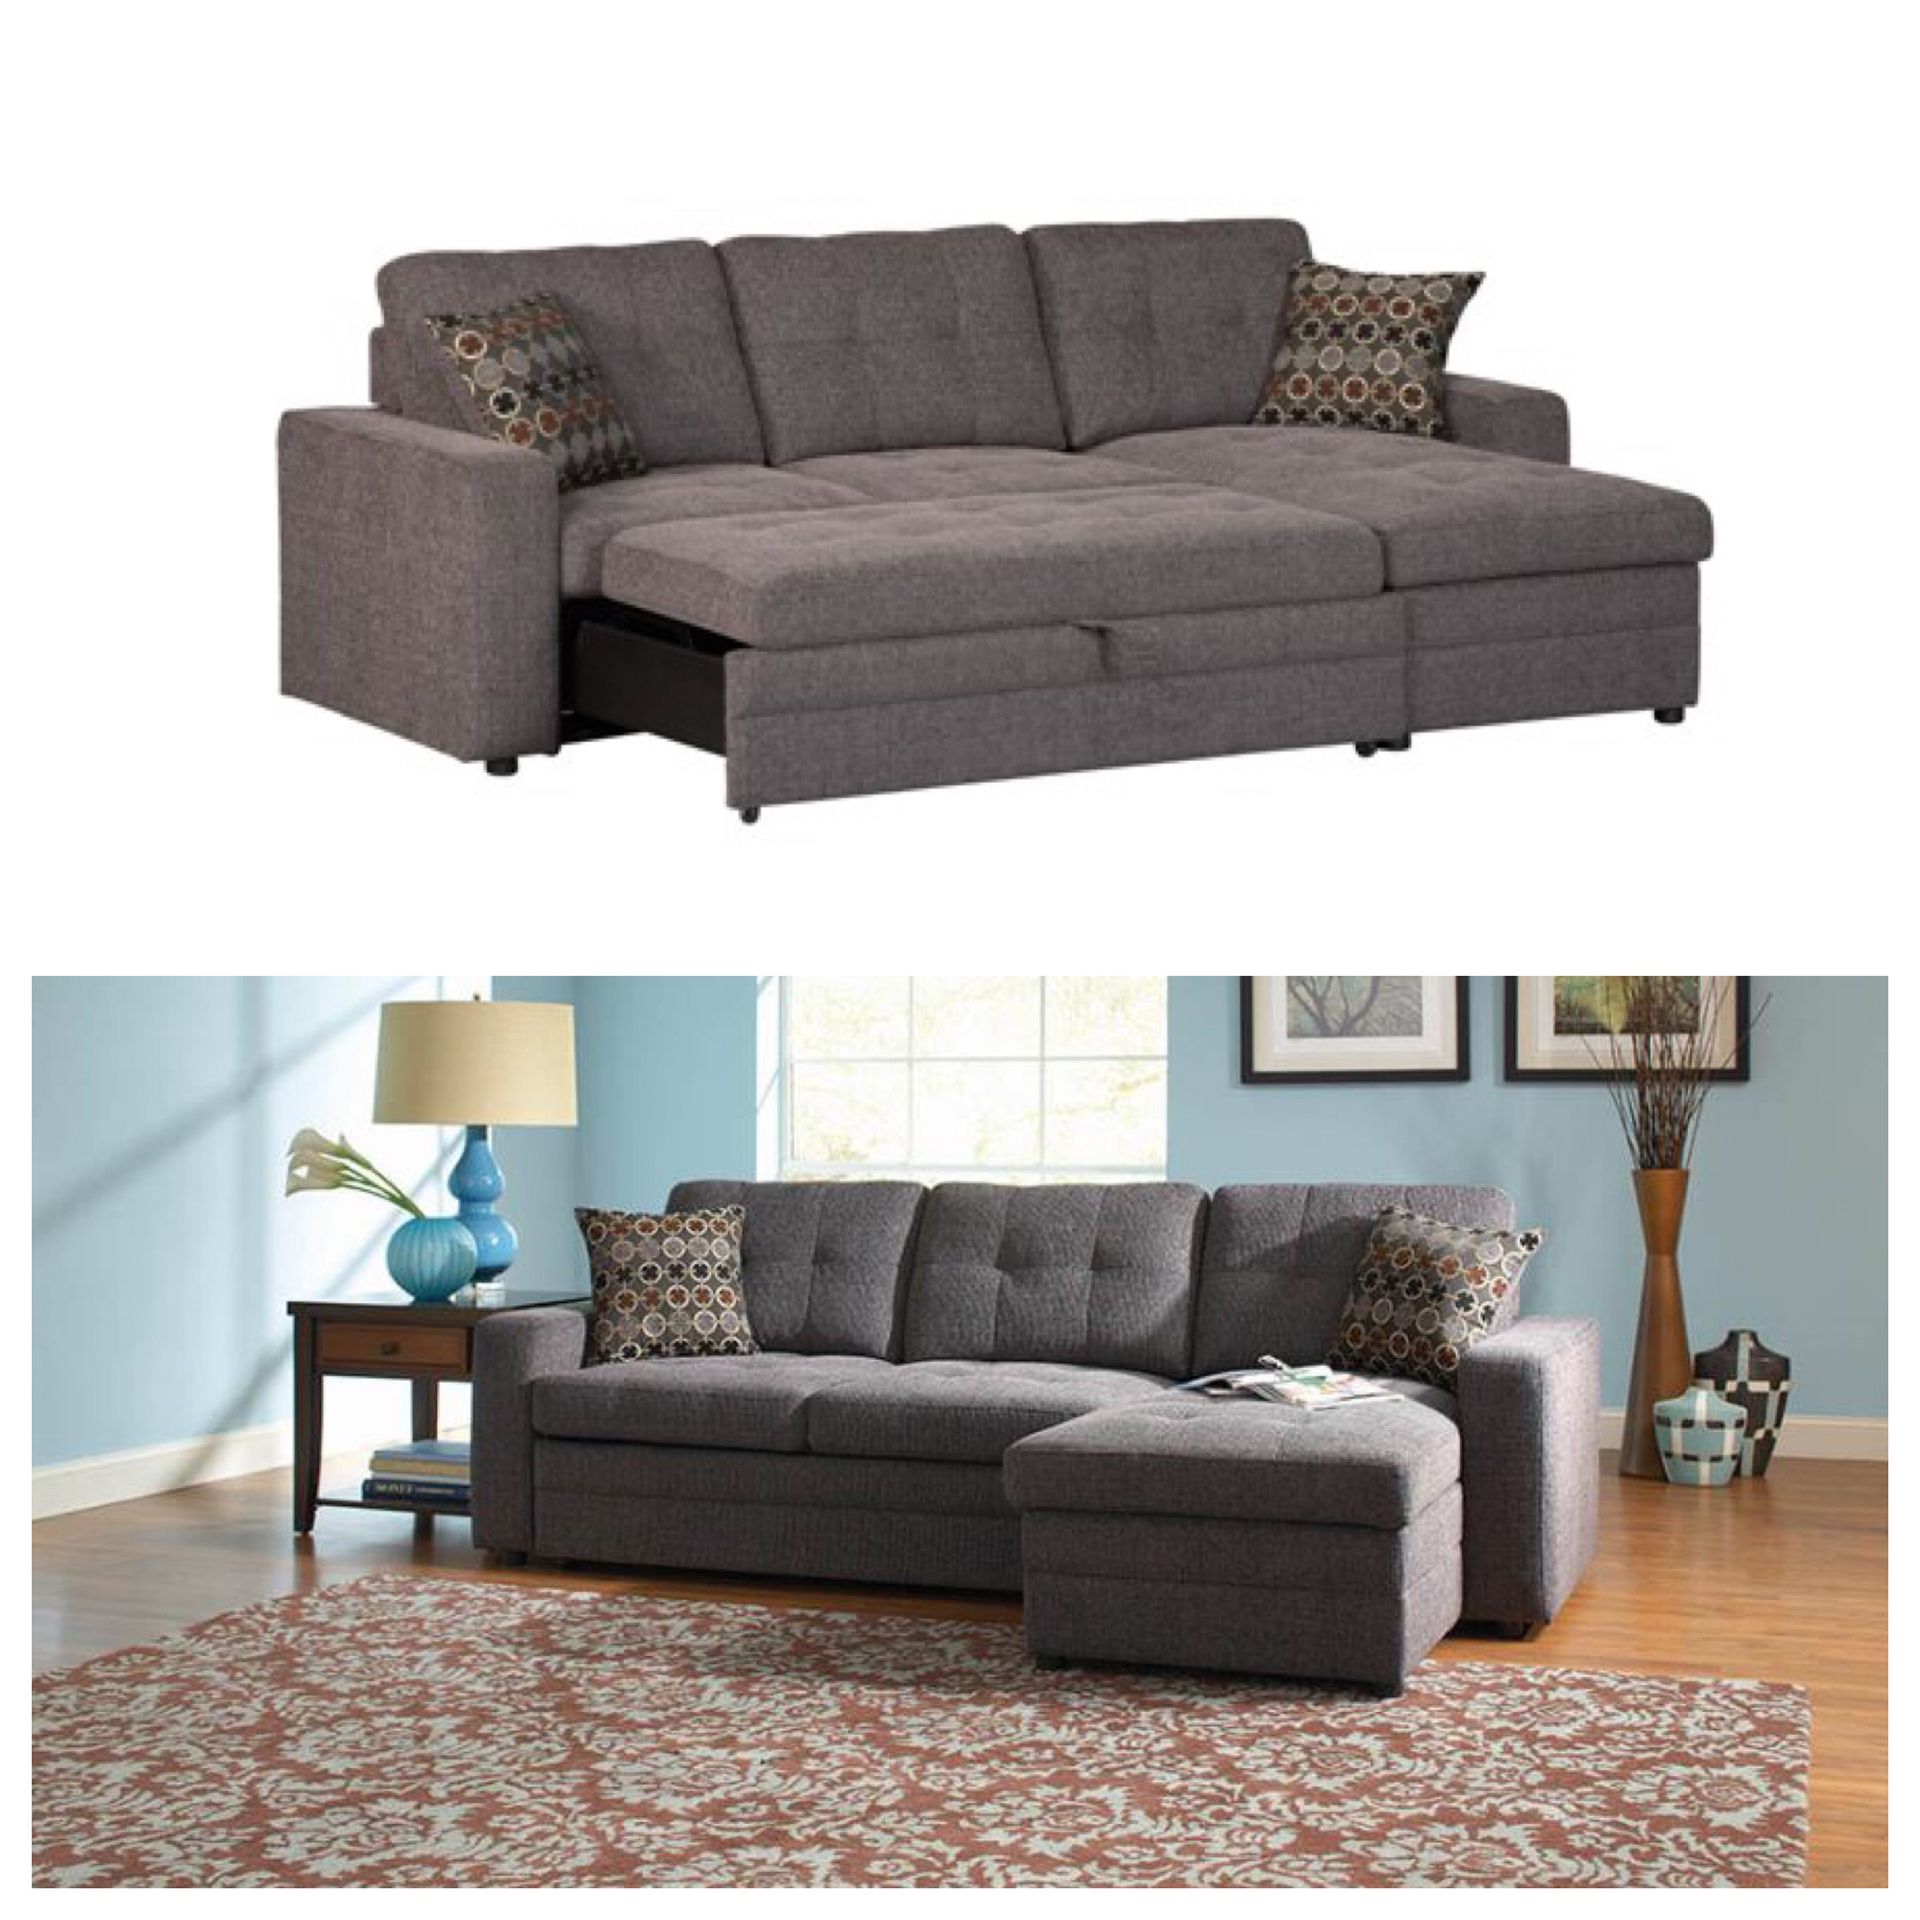 2 PCS SLEEPER SECTIONAL ... with delivery included